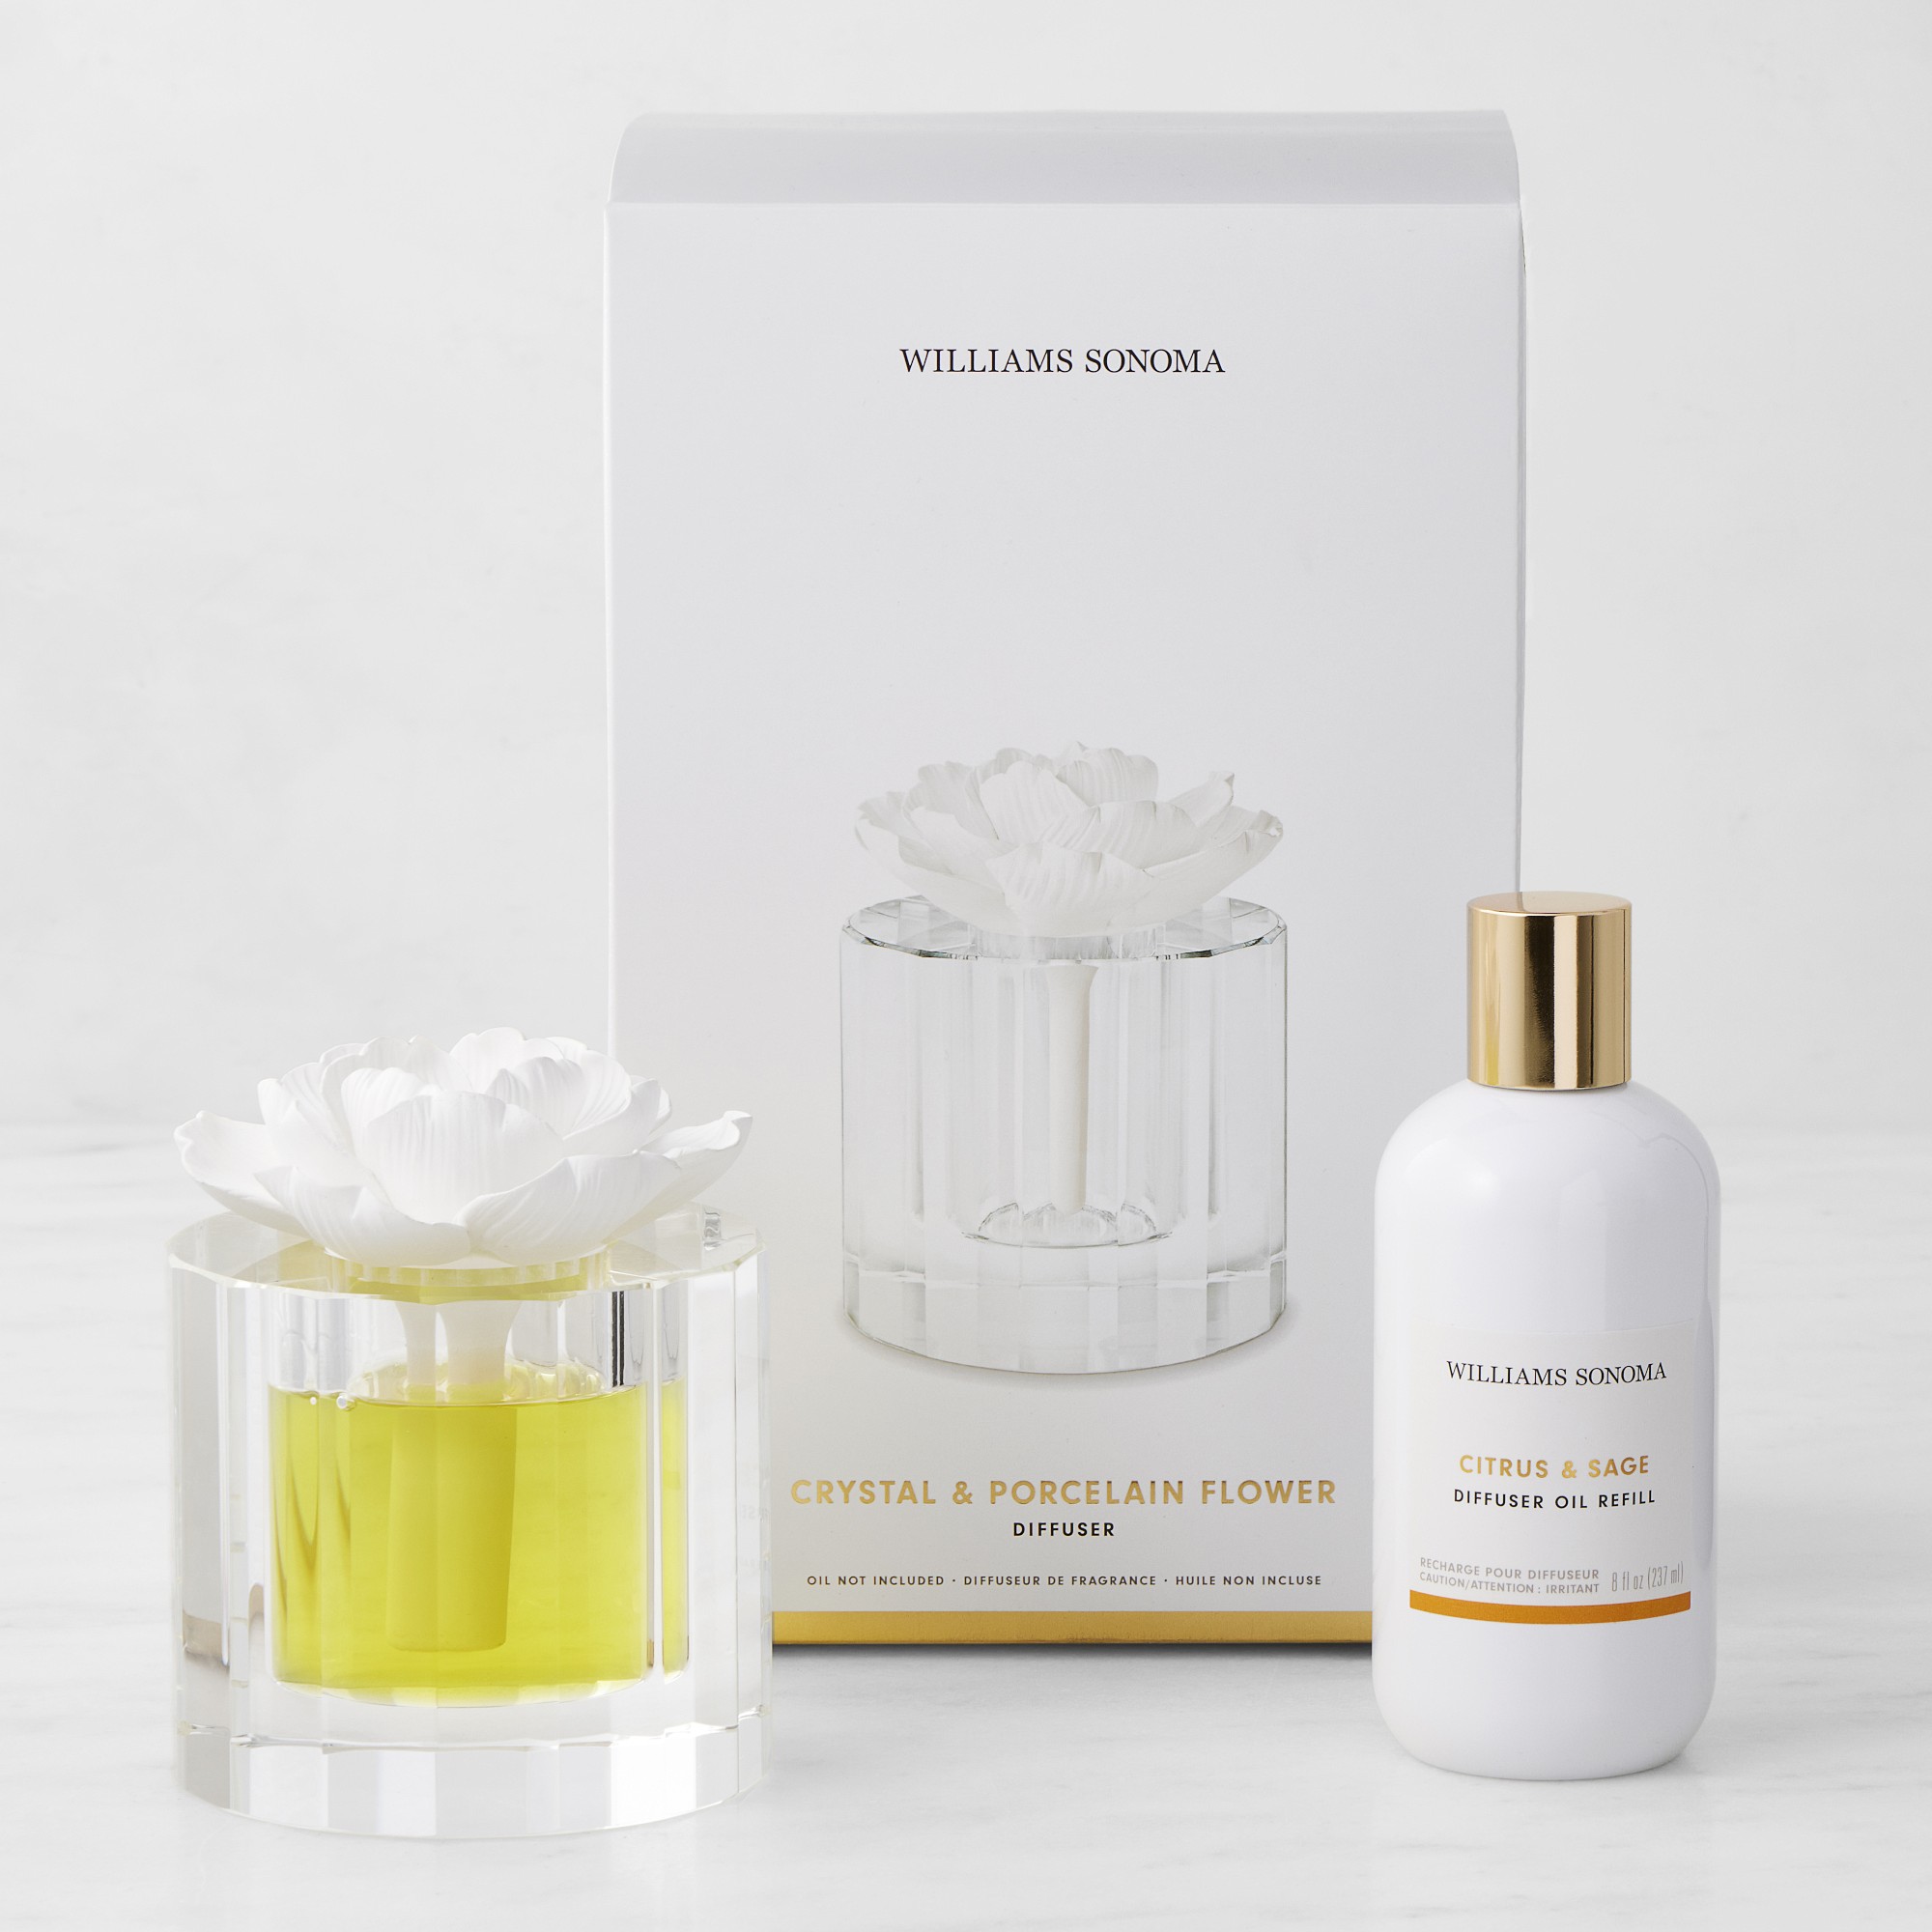 Williams Sonoma Crystal Flower Diffuser and Refill Set